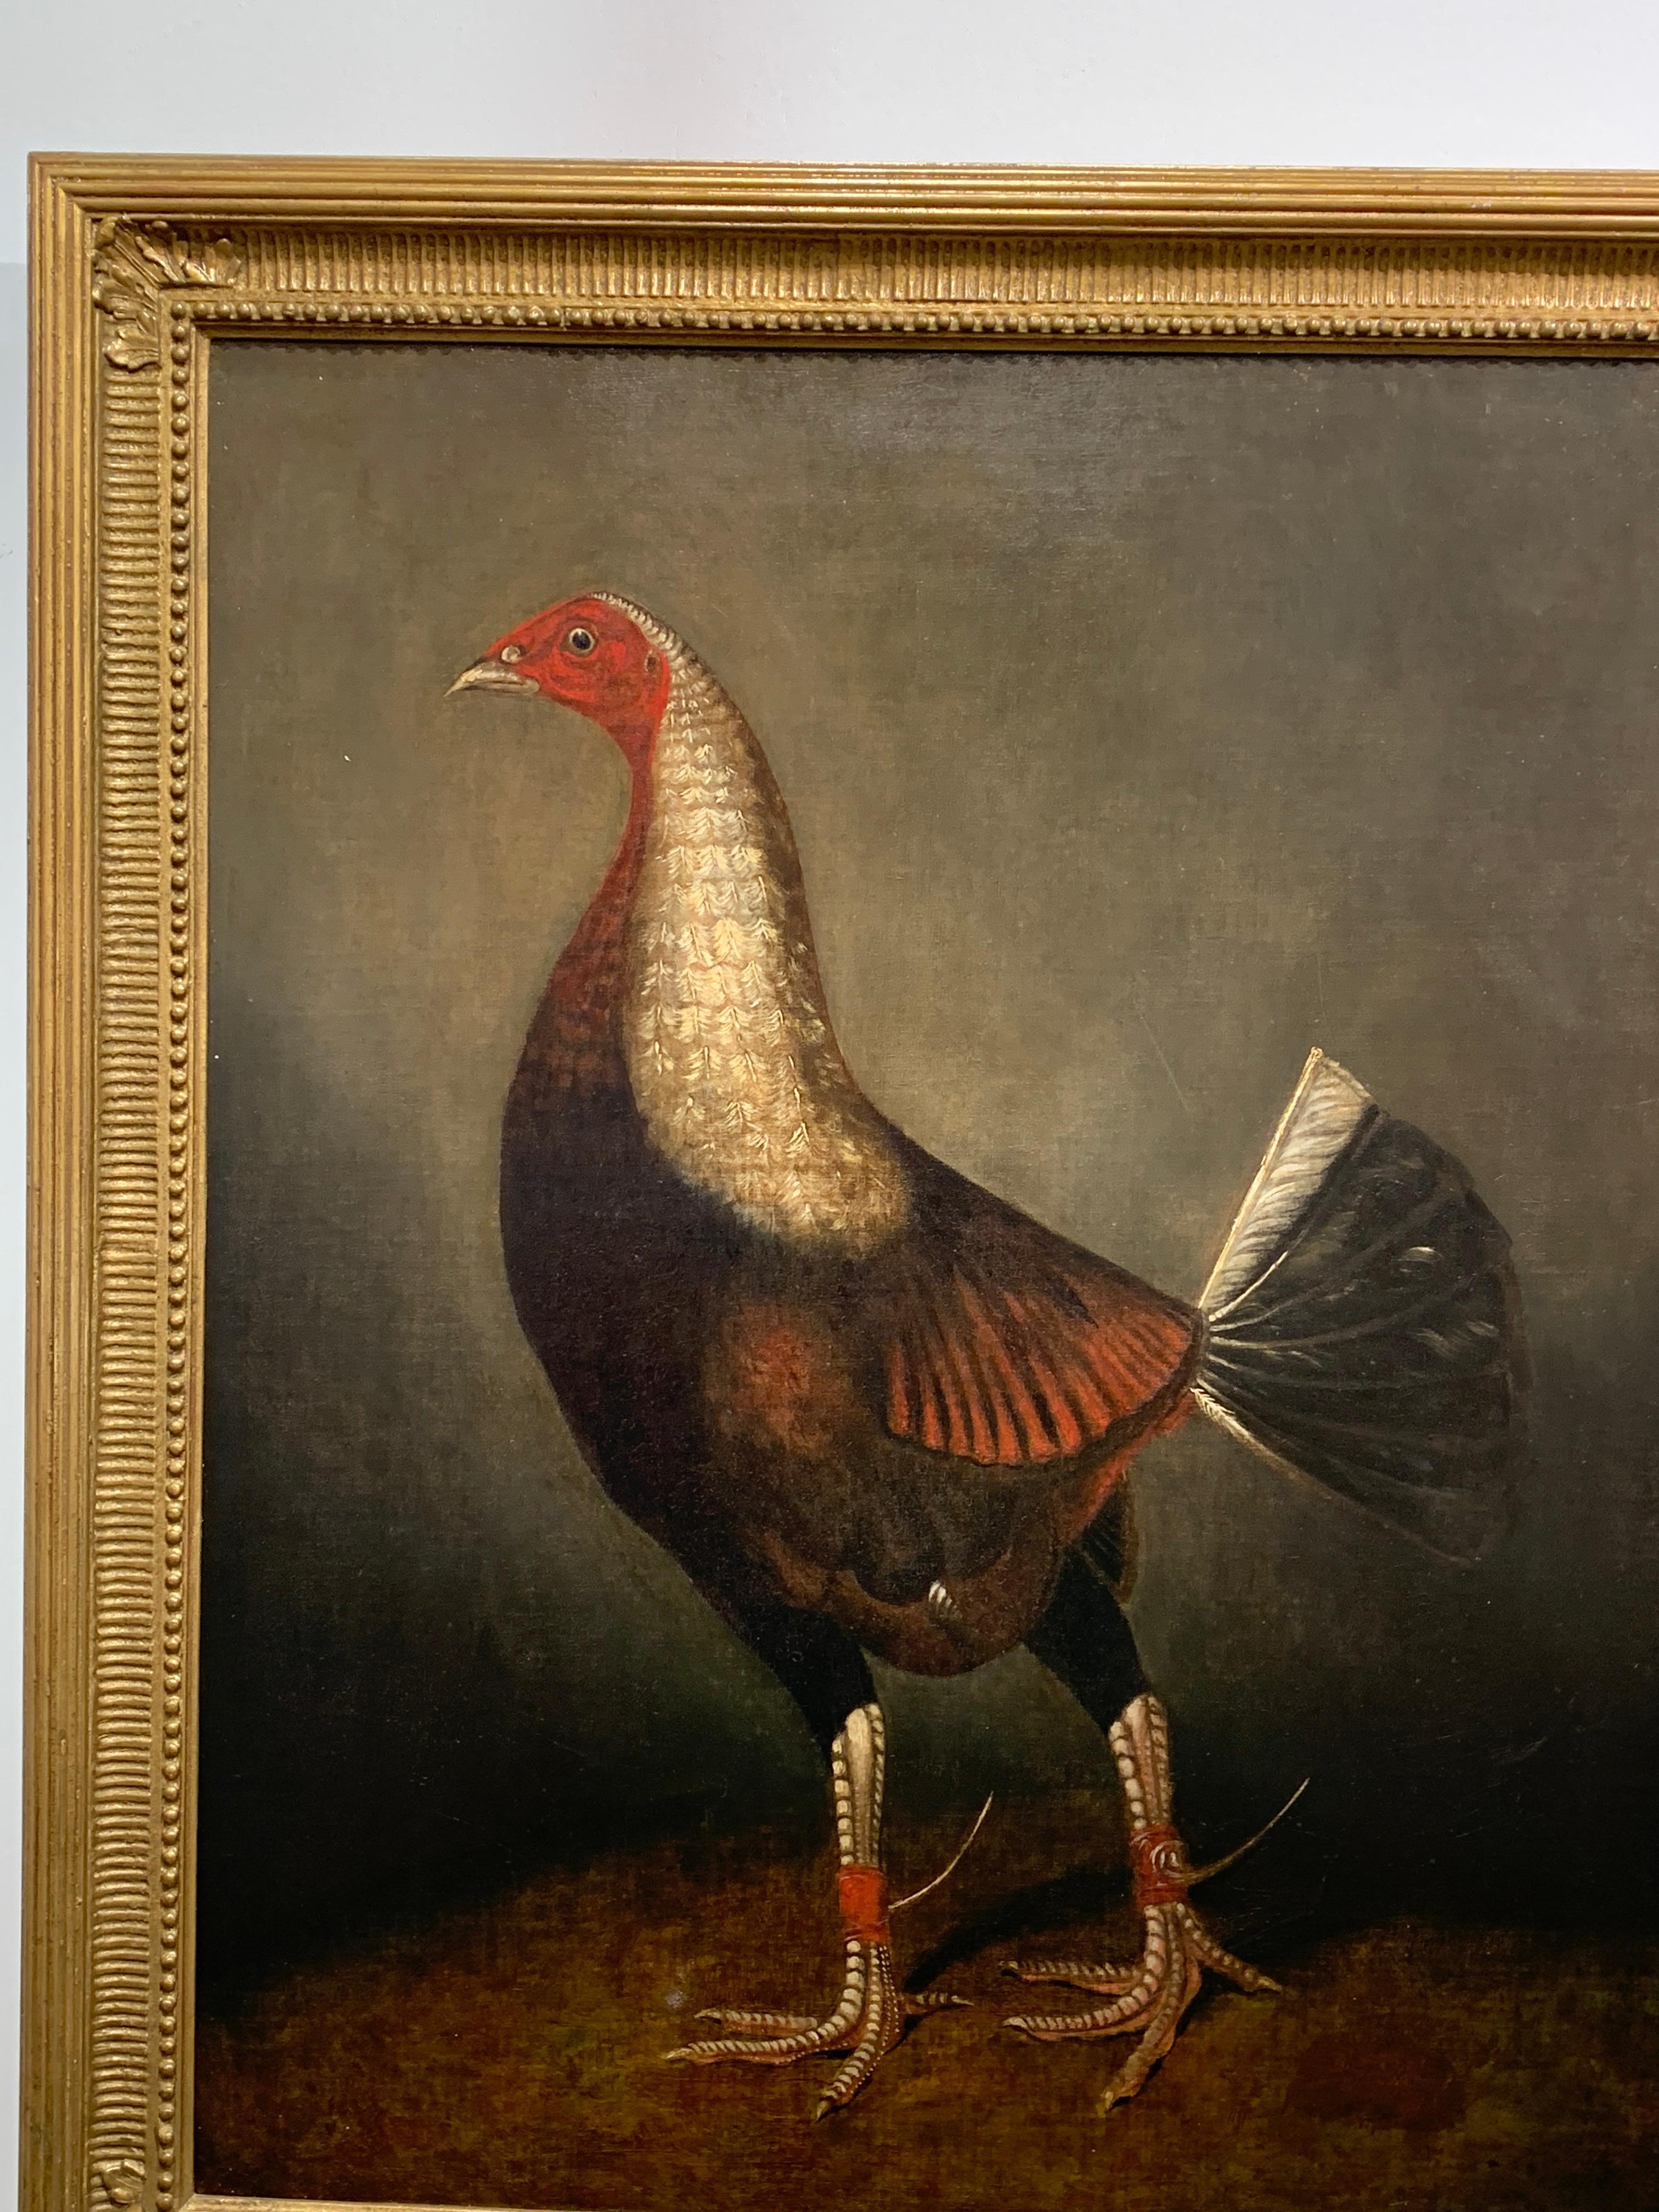 19th Century English portrait of a Fighting Game Cock, with Spurs - Painting by Ben Marshall